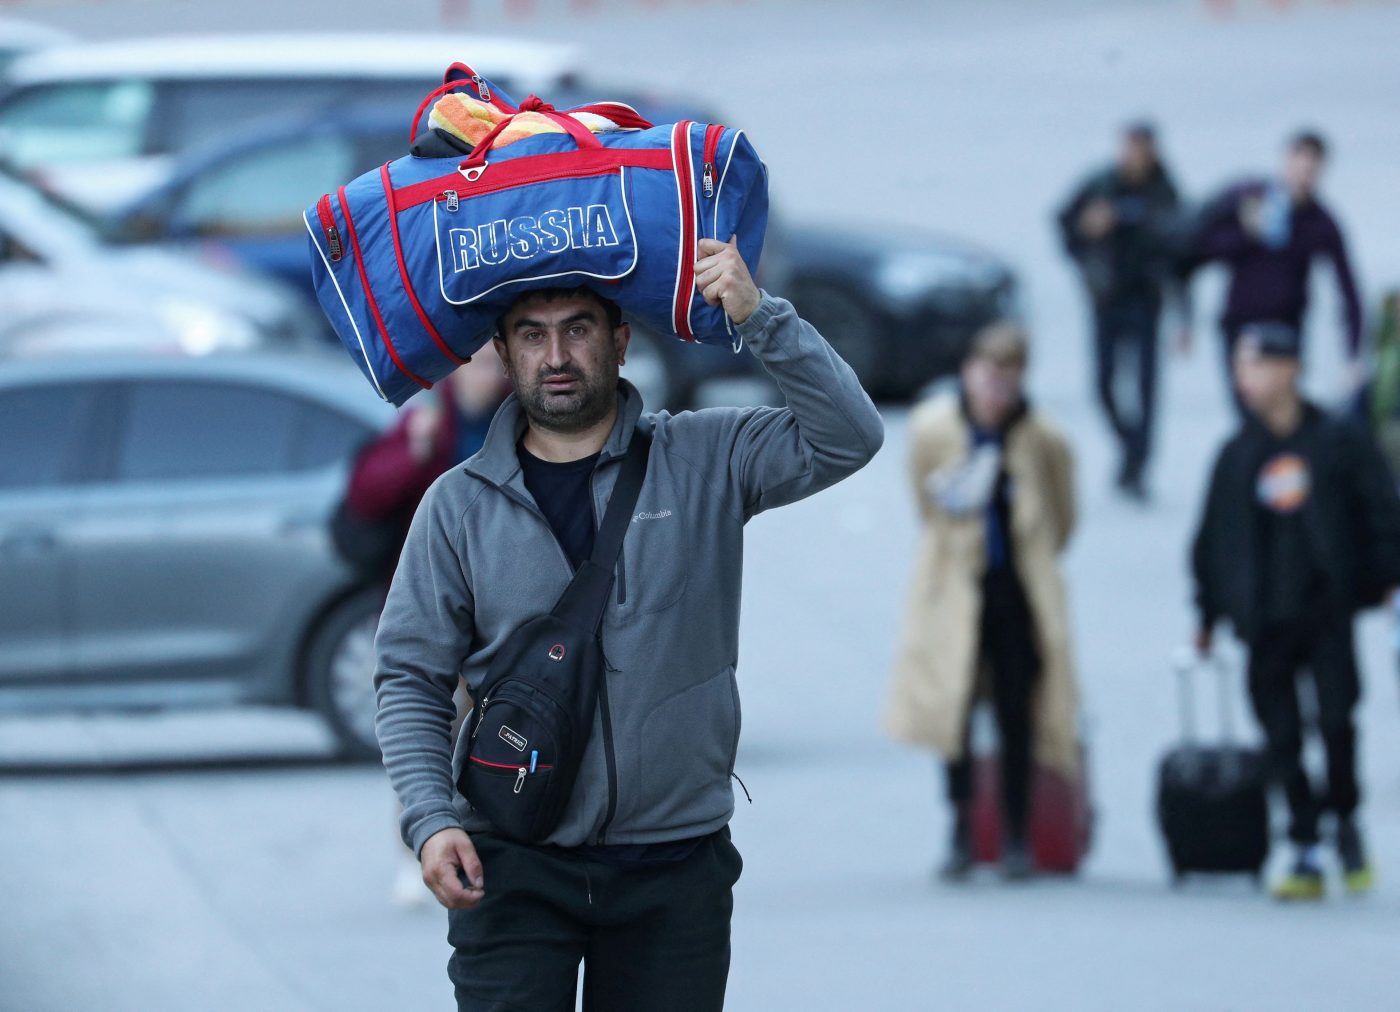 Photo: A man carries a bag on his head as travellers from Russia cross the border to Georgia at the Zemo Larsi/Verkhny Lars station, Georgia September 26, 2022. Credit: REUTERS/Irakli Gedenidze